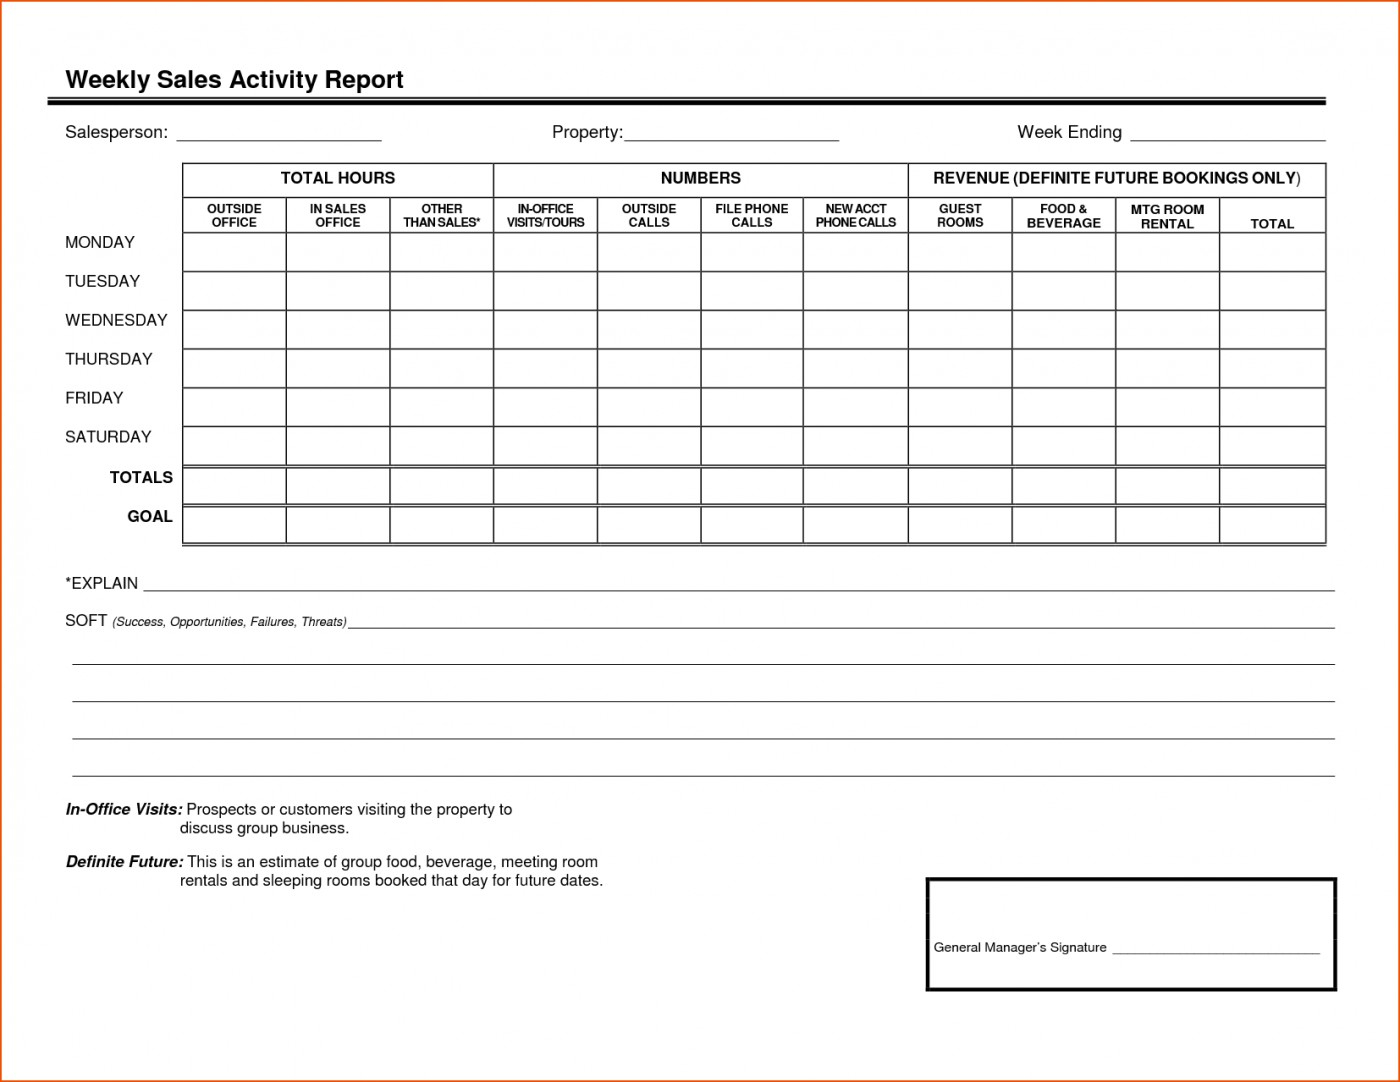 001 Sales Calls Report Template Call Awesome Ideas Daily In For Sales Call Report Template Free